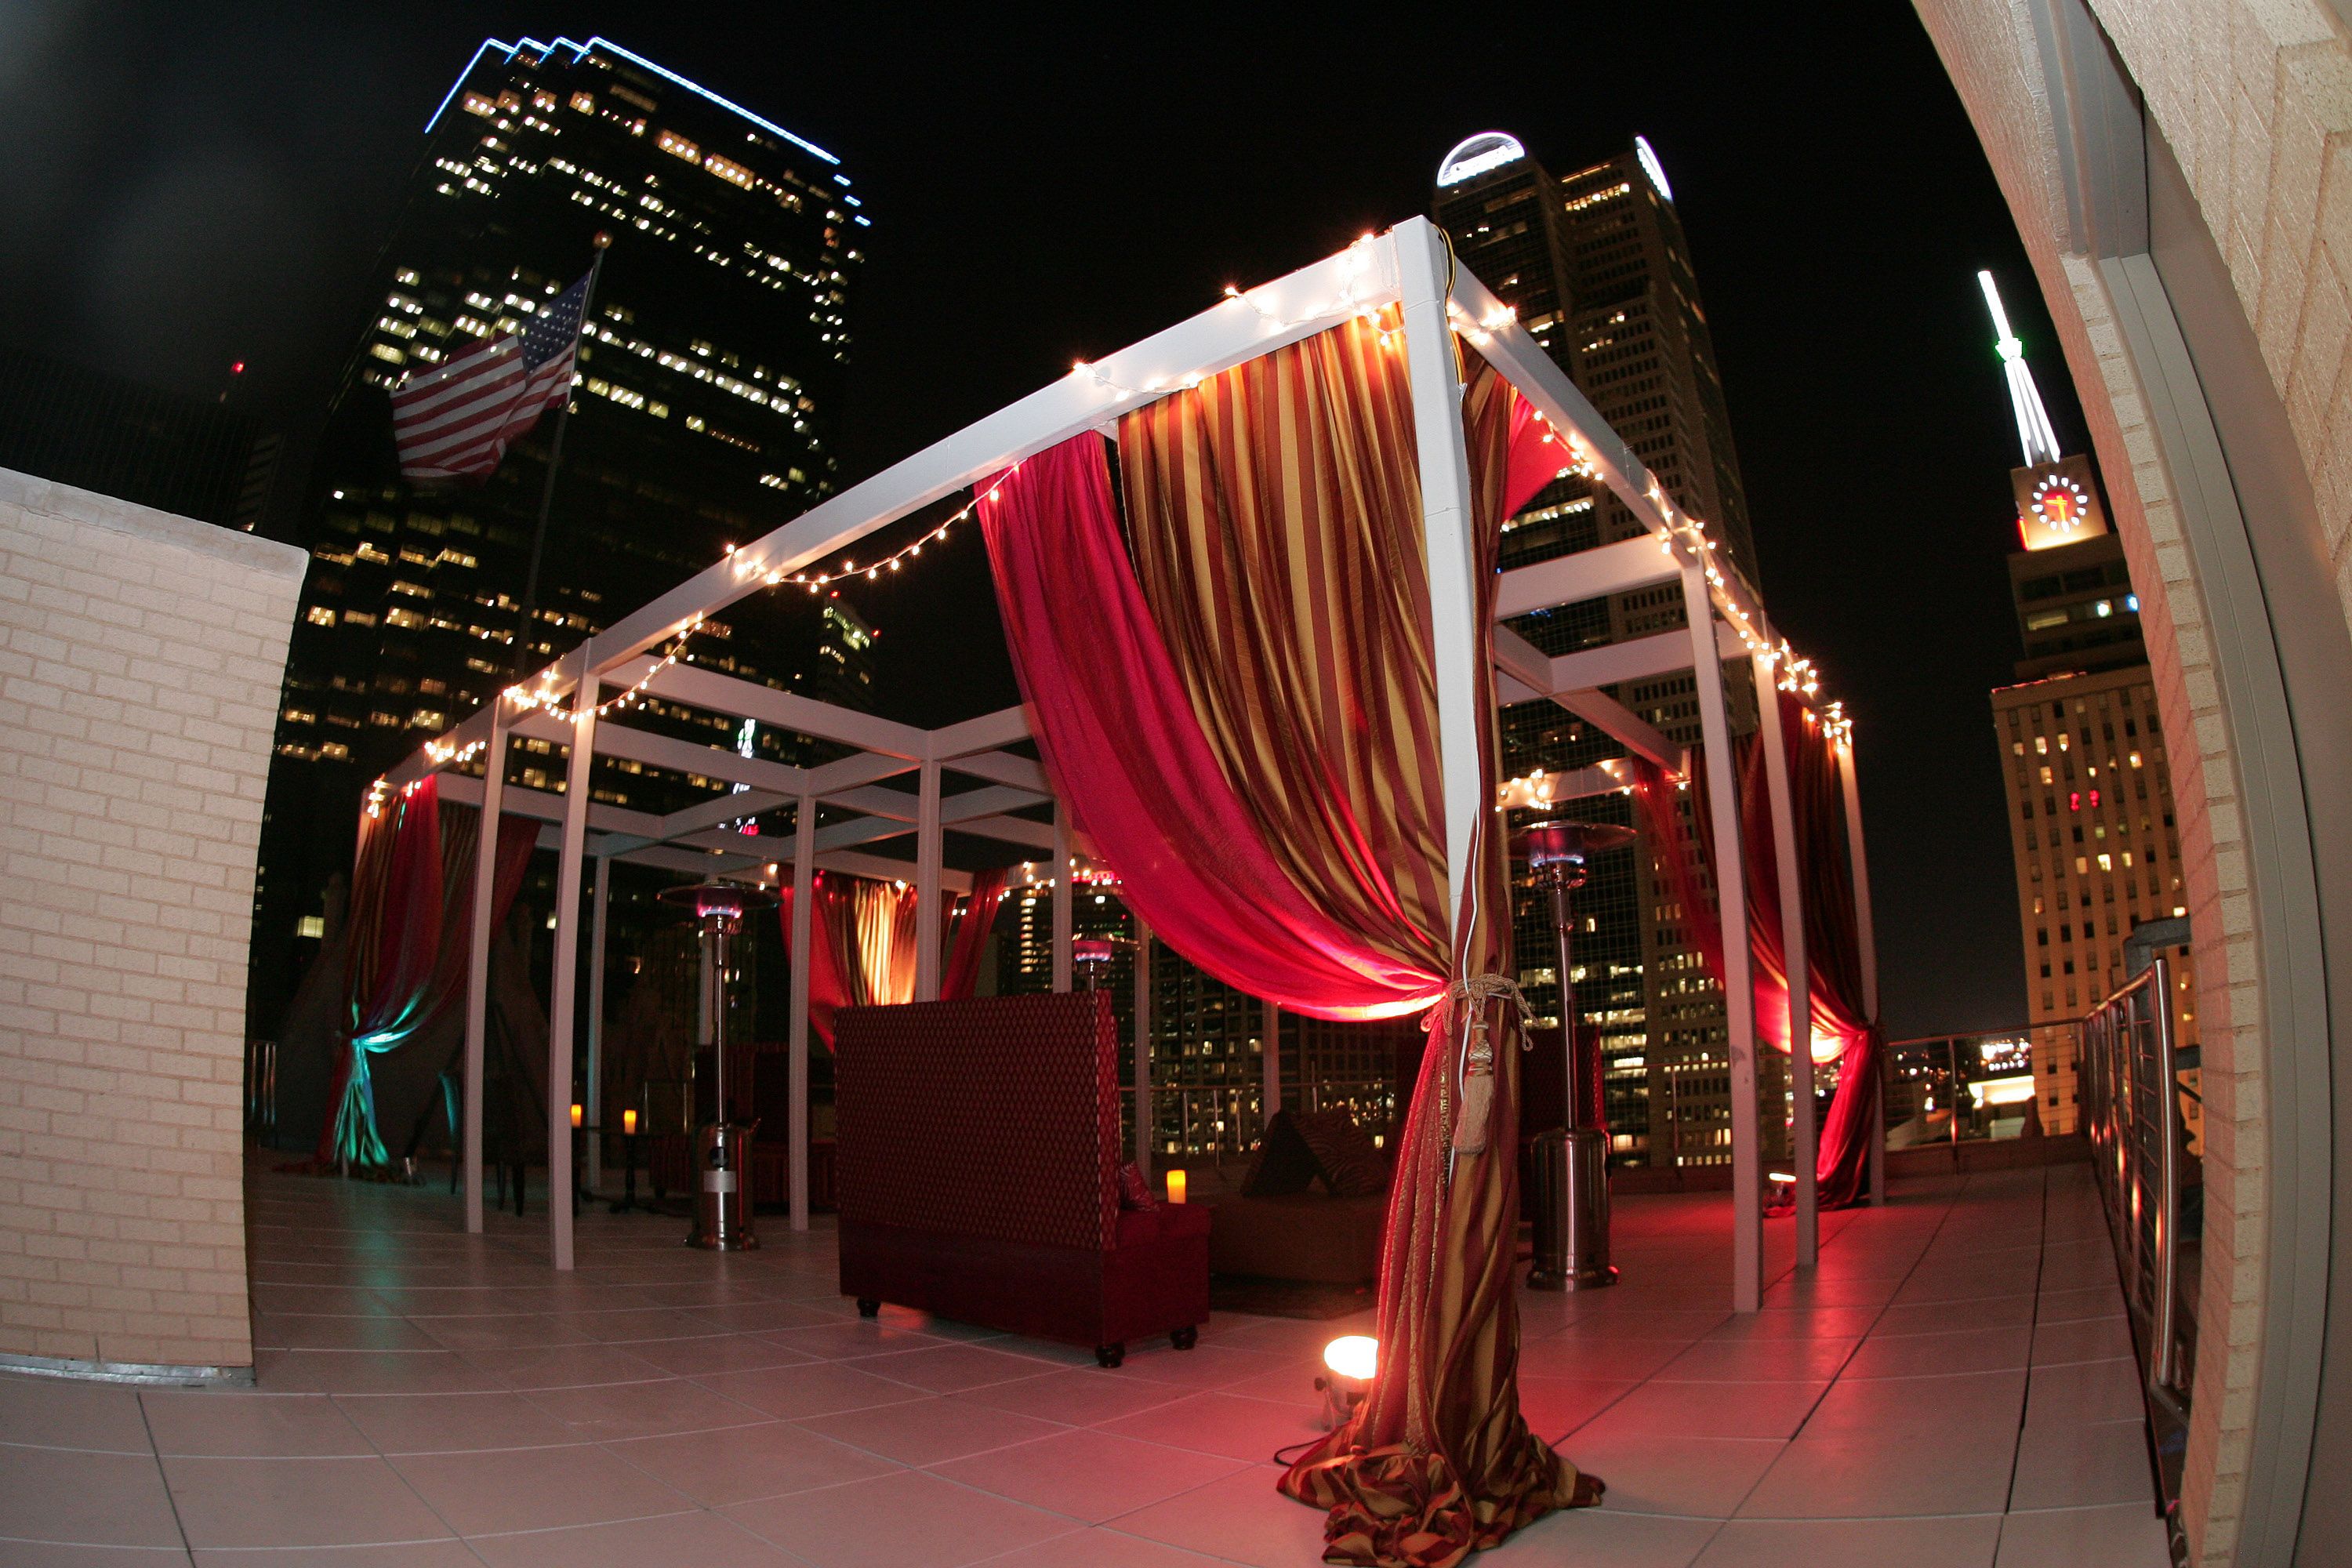 A rooftop bar in Dallas